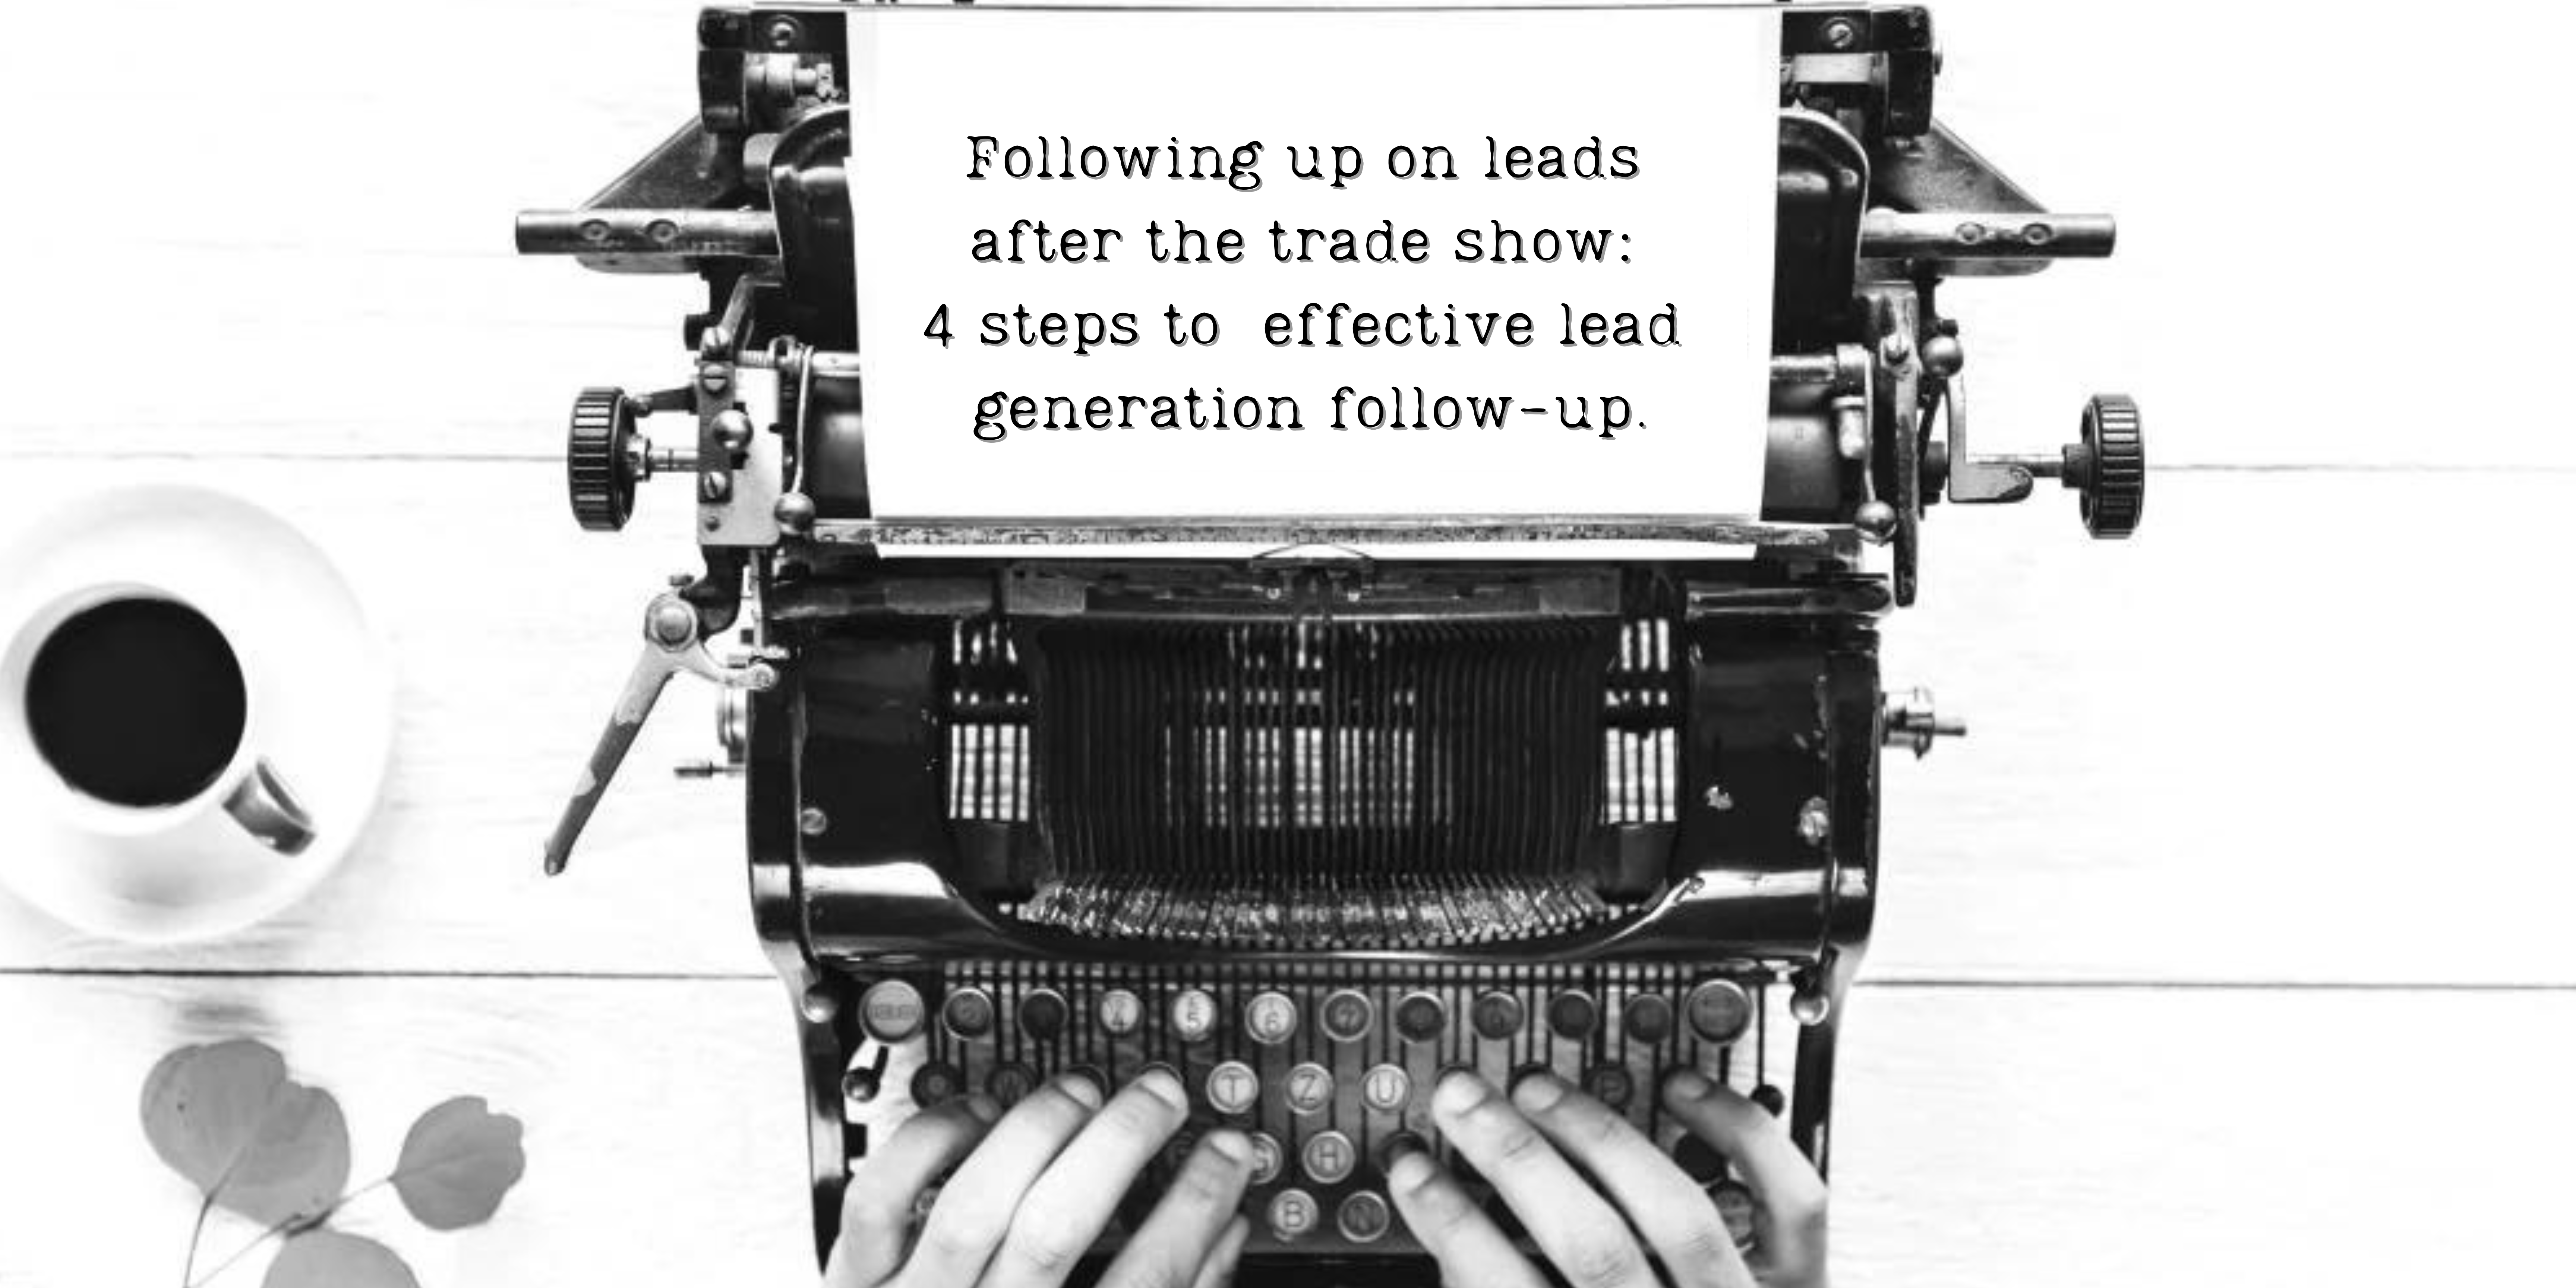 Effective post trade show lead follow-up